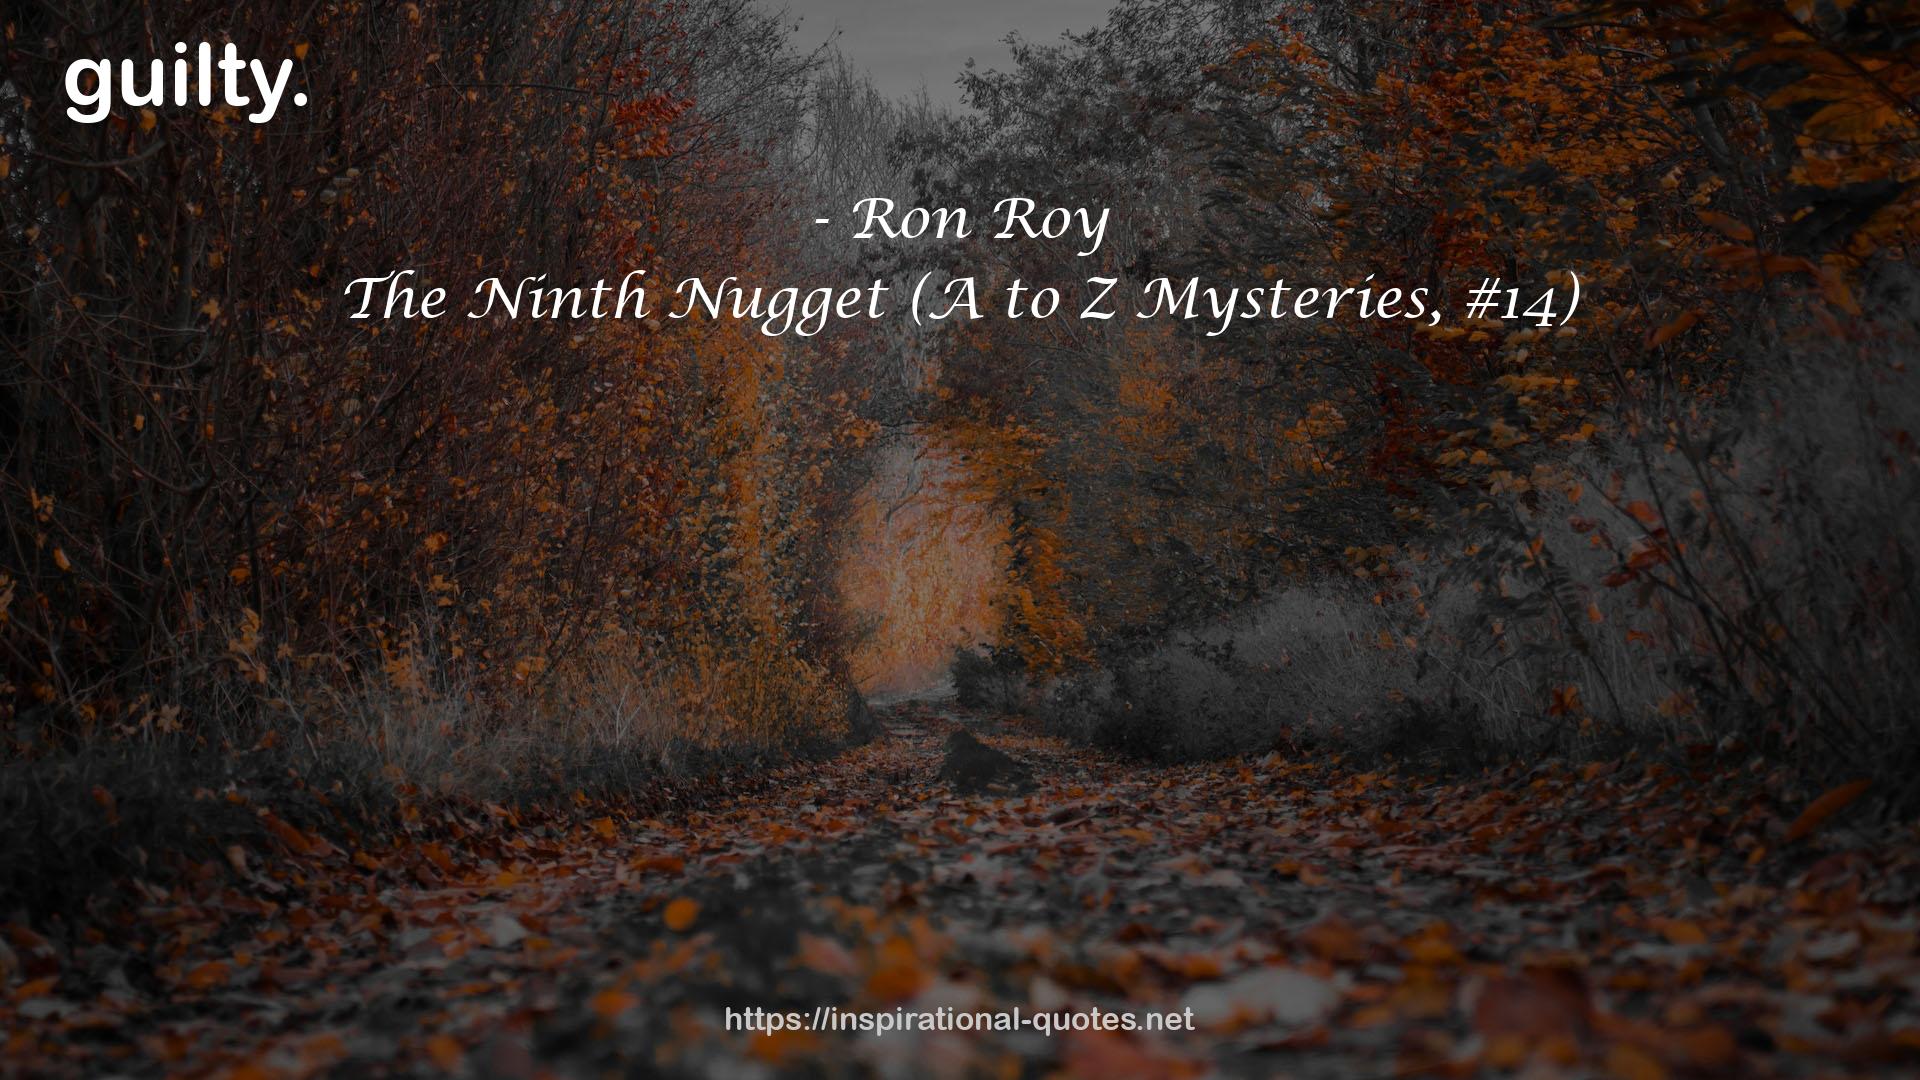 The Ninth Nugget (A to Z Mysteries, #14) QUOTES